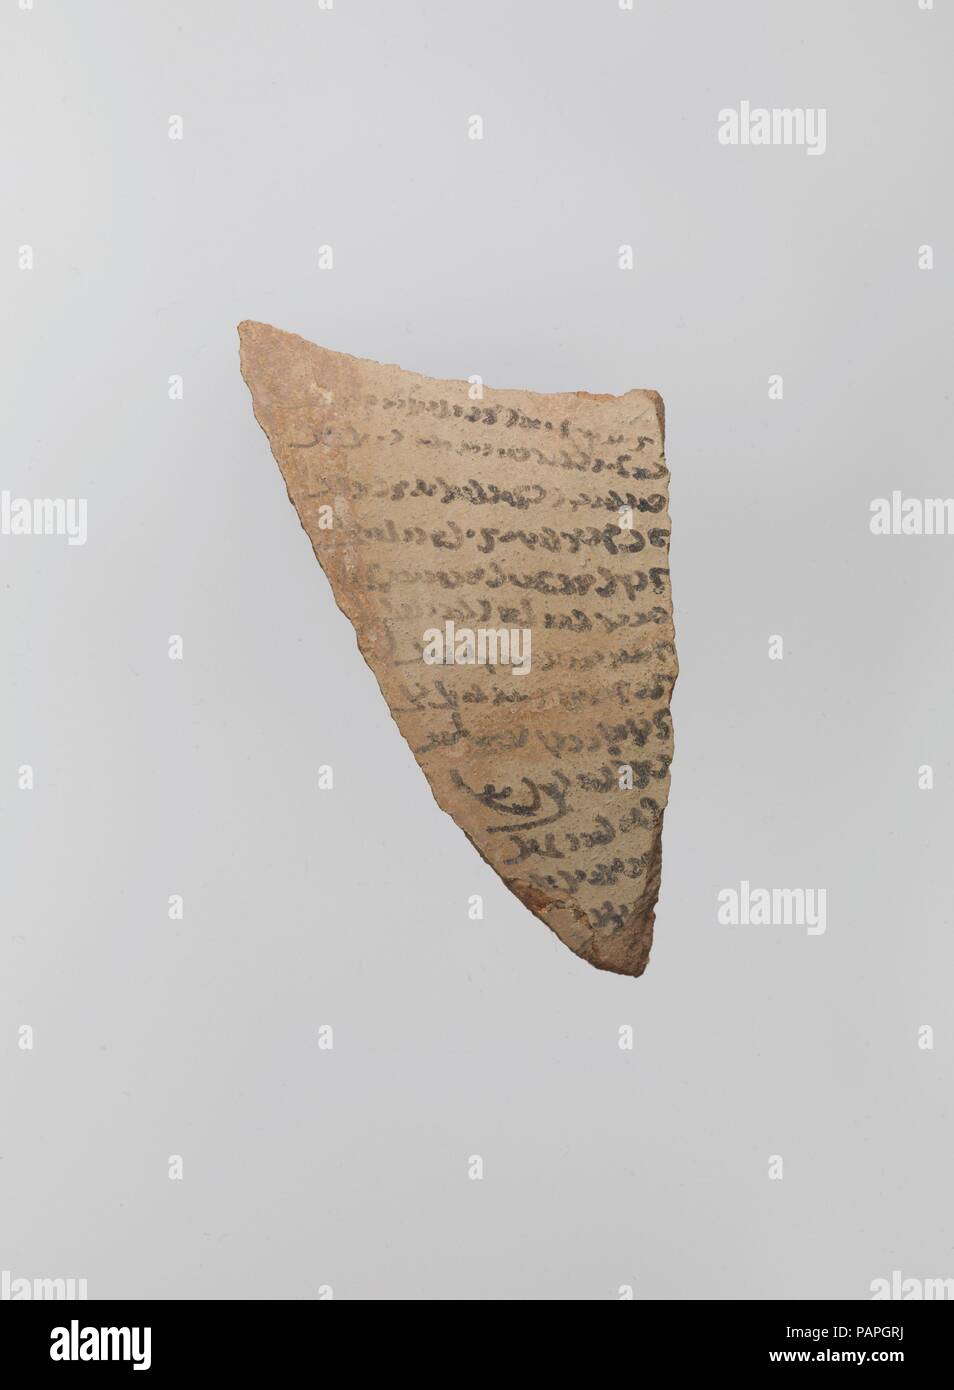 Magic Bowl and an Ostrakon. Dimensions: H. 4 1/8 in. (10.4 cm)  W. 2 5/16 in.(5.8 cm)  D. 1/4 in. (0.7 cm). Date: 9th-10th century.  This fragment appears to be written in a local variant of Pahlavi, the ancient script of the Persian language, which remained in use, beside Arabic, at least until the 10th century, especially in Zoroastrian circles. This fragment seems to provide evidence of Nishapur's non-Muslim population. Museum: Metropolitan Museum of Art, New York, USA. Stock Photo